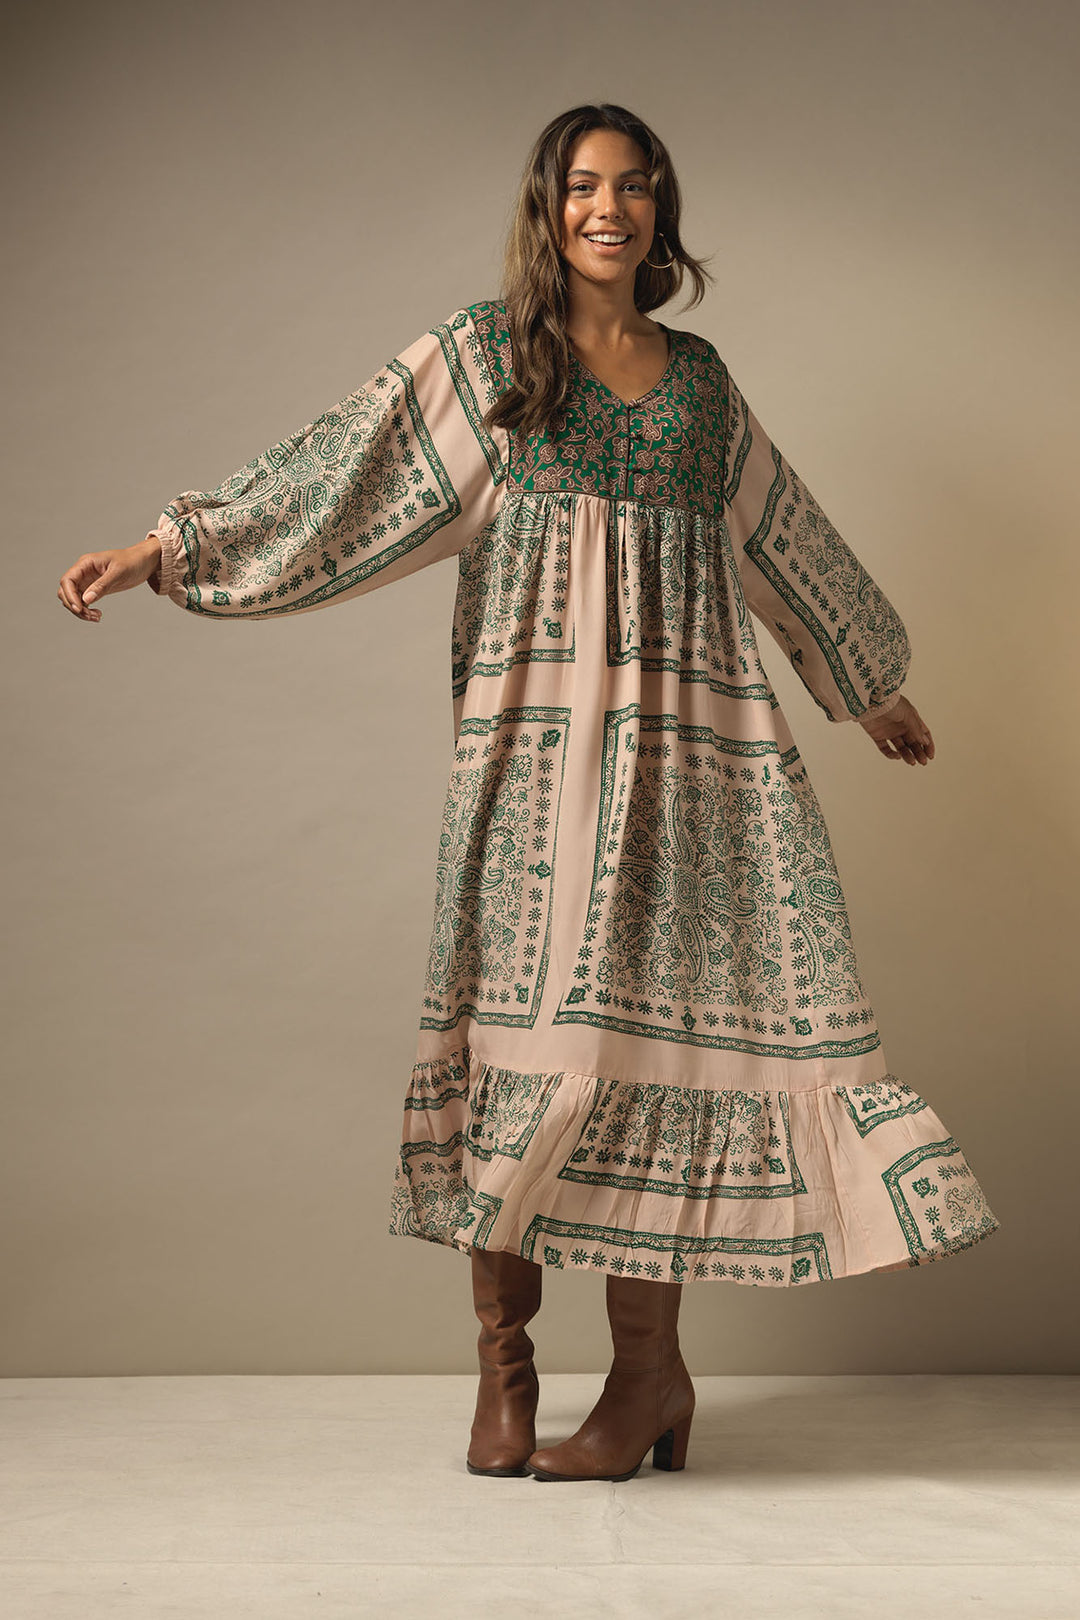 ladies maxi boho dress Party Pockets with mehndi green print on a light brown background by One Hundred Stars